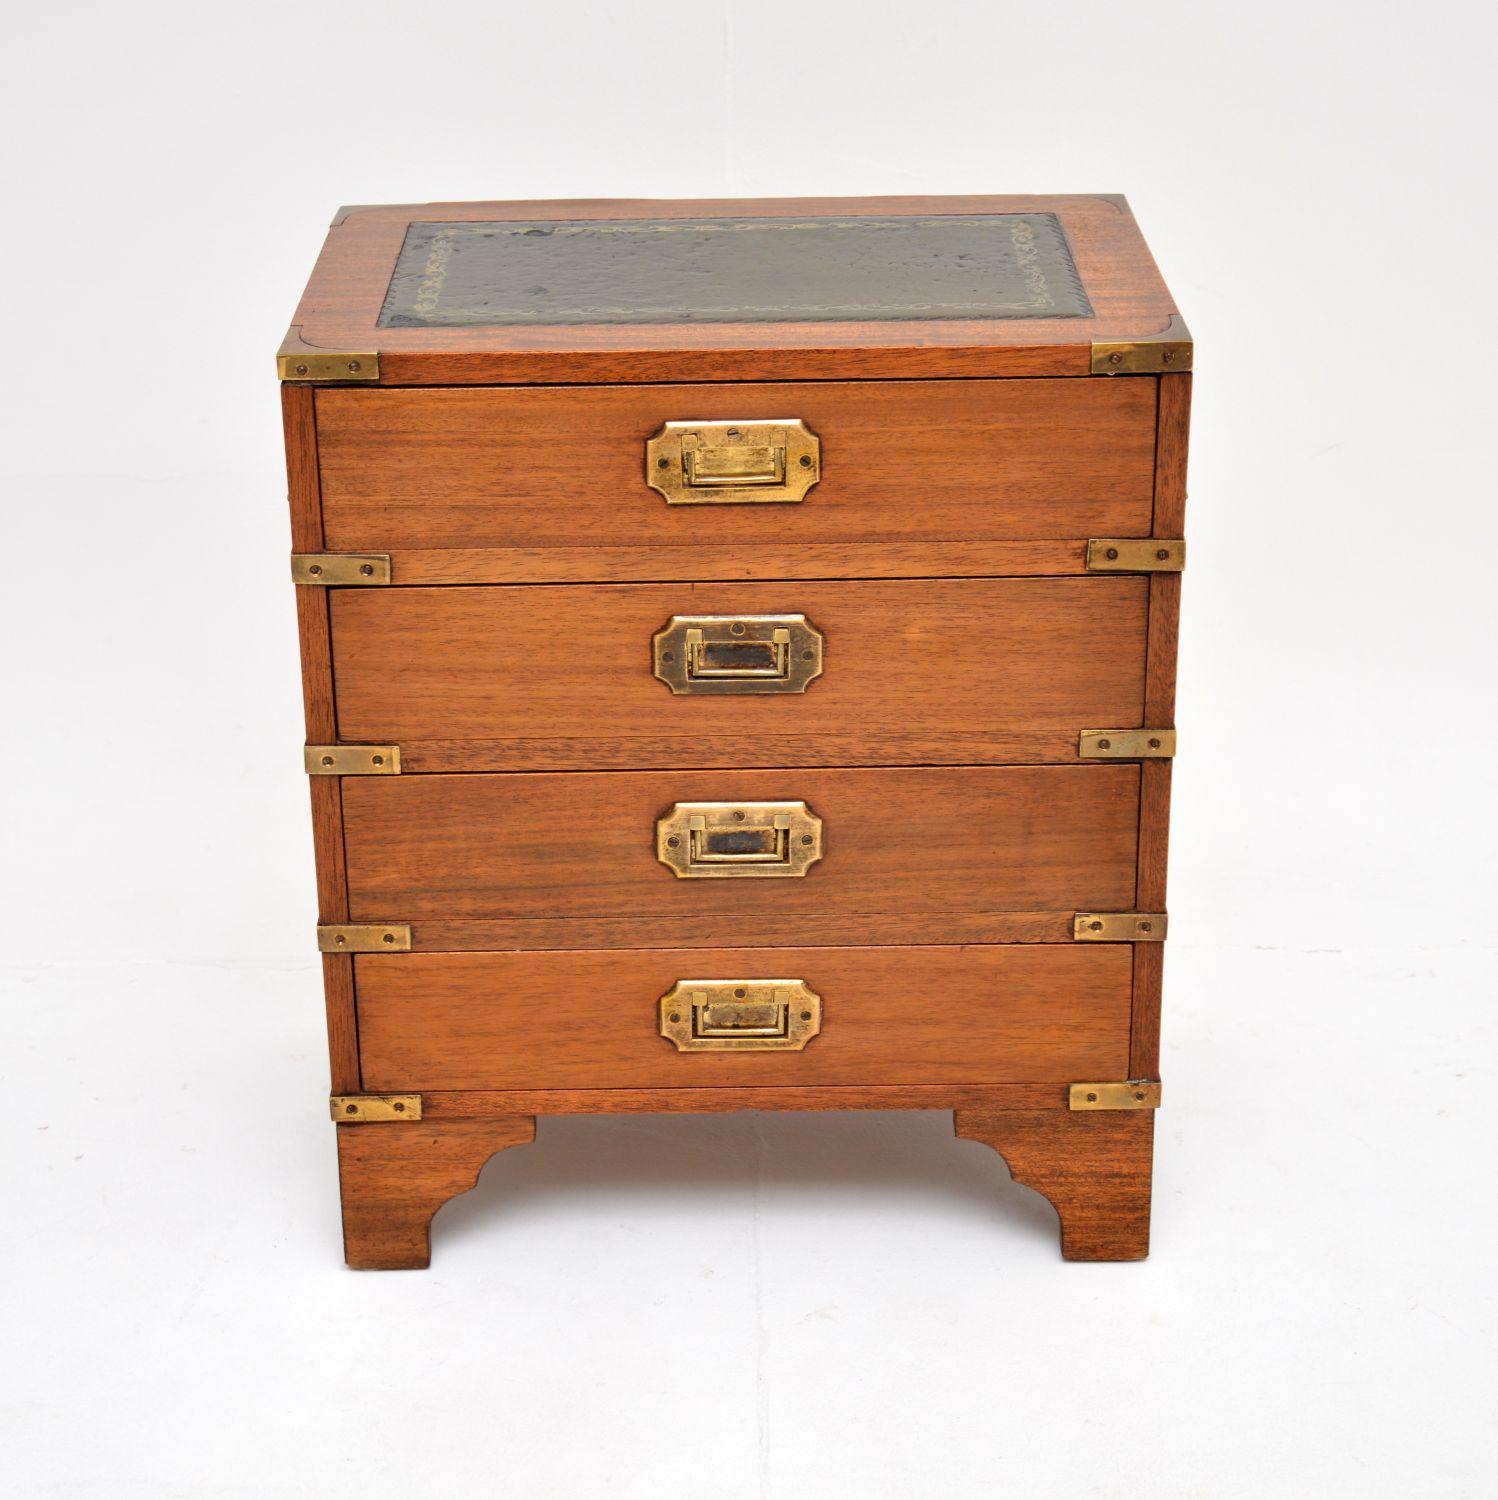 A smart and very well made antique chest of drawers in the military campaign style. This was made in England, it dates from around the 1930’s.

It is of lovely quality and is a very useful size, quite small and low, perfect for a bedside chest or